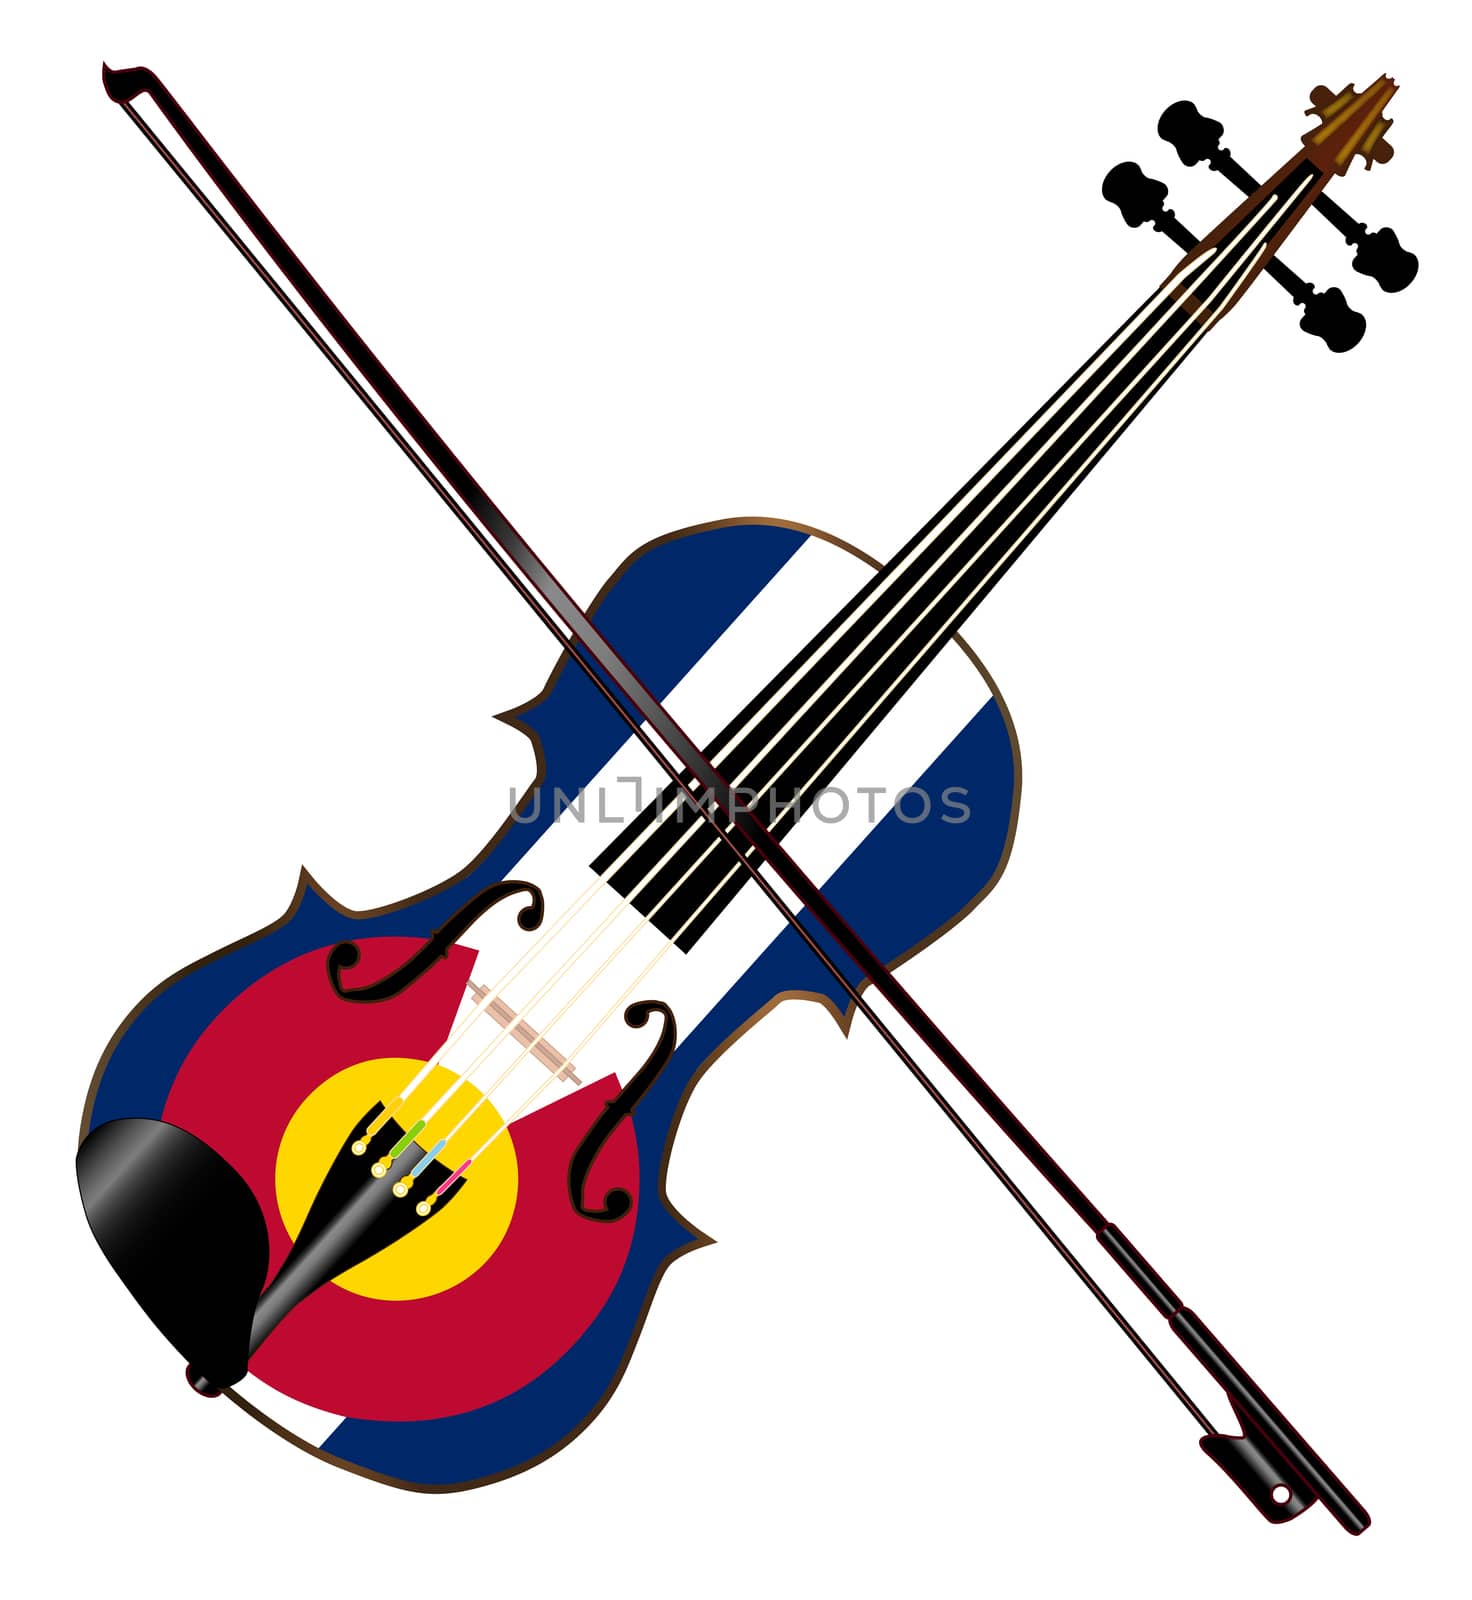 A typical violin with Colorado flag and bow isolated over a white background